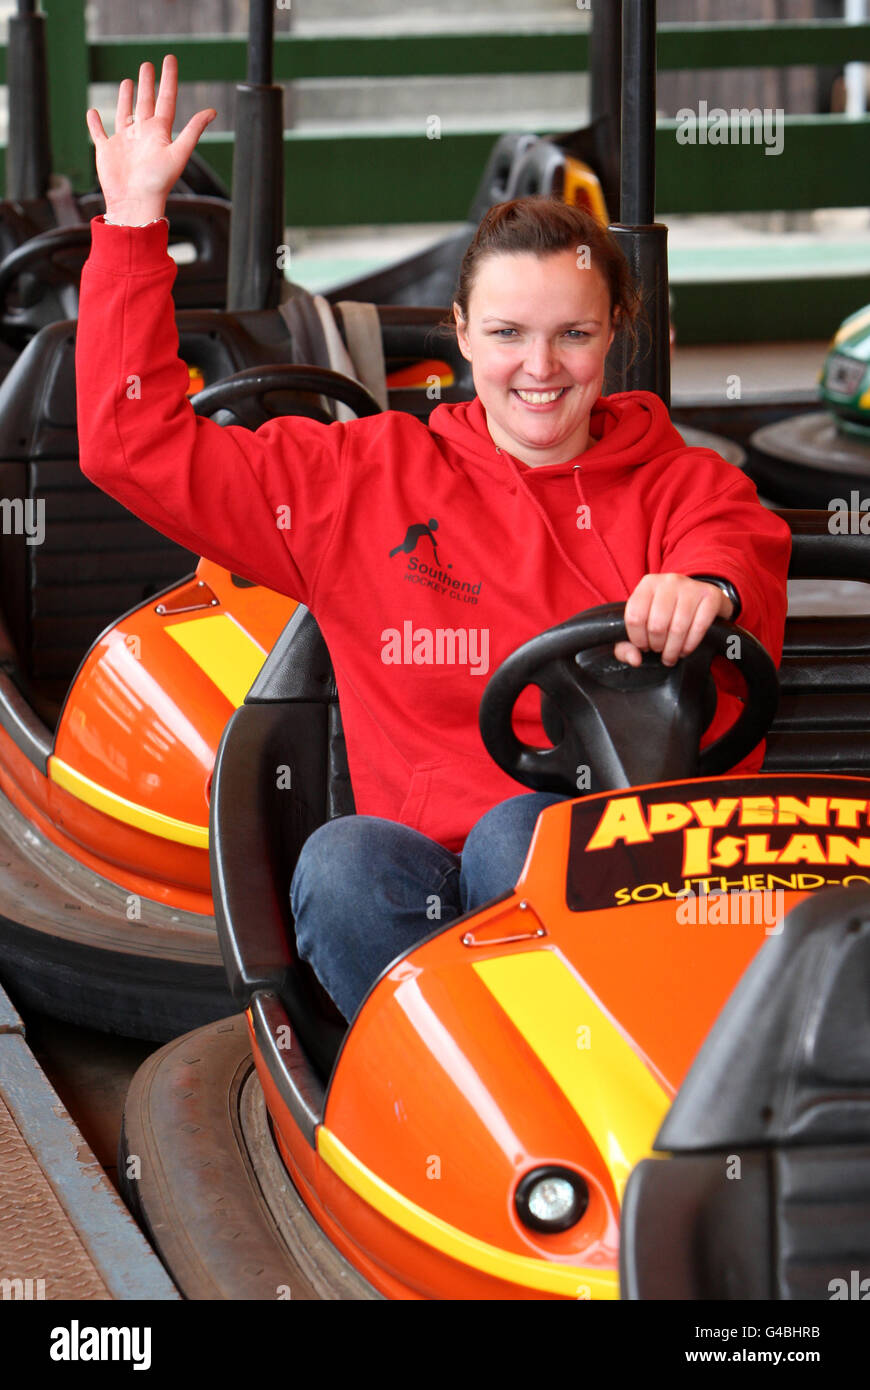 Recruitment Consultant Laura Byng, 28, from Southend, breaks The World Record for the longest Dodgem Car Marathon at Adventure Island in Southend on Sea. Stock Photo